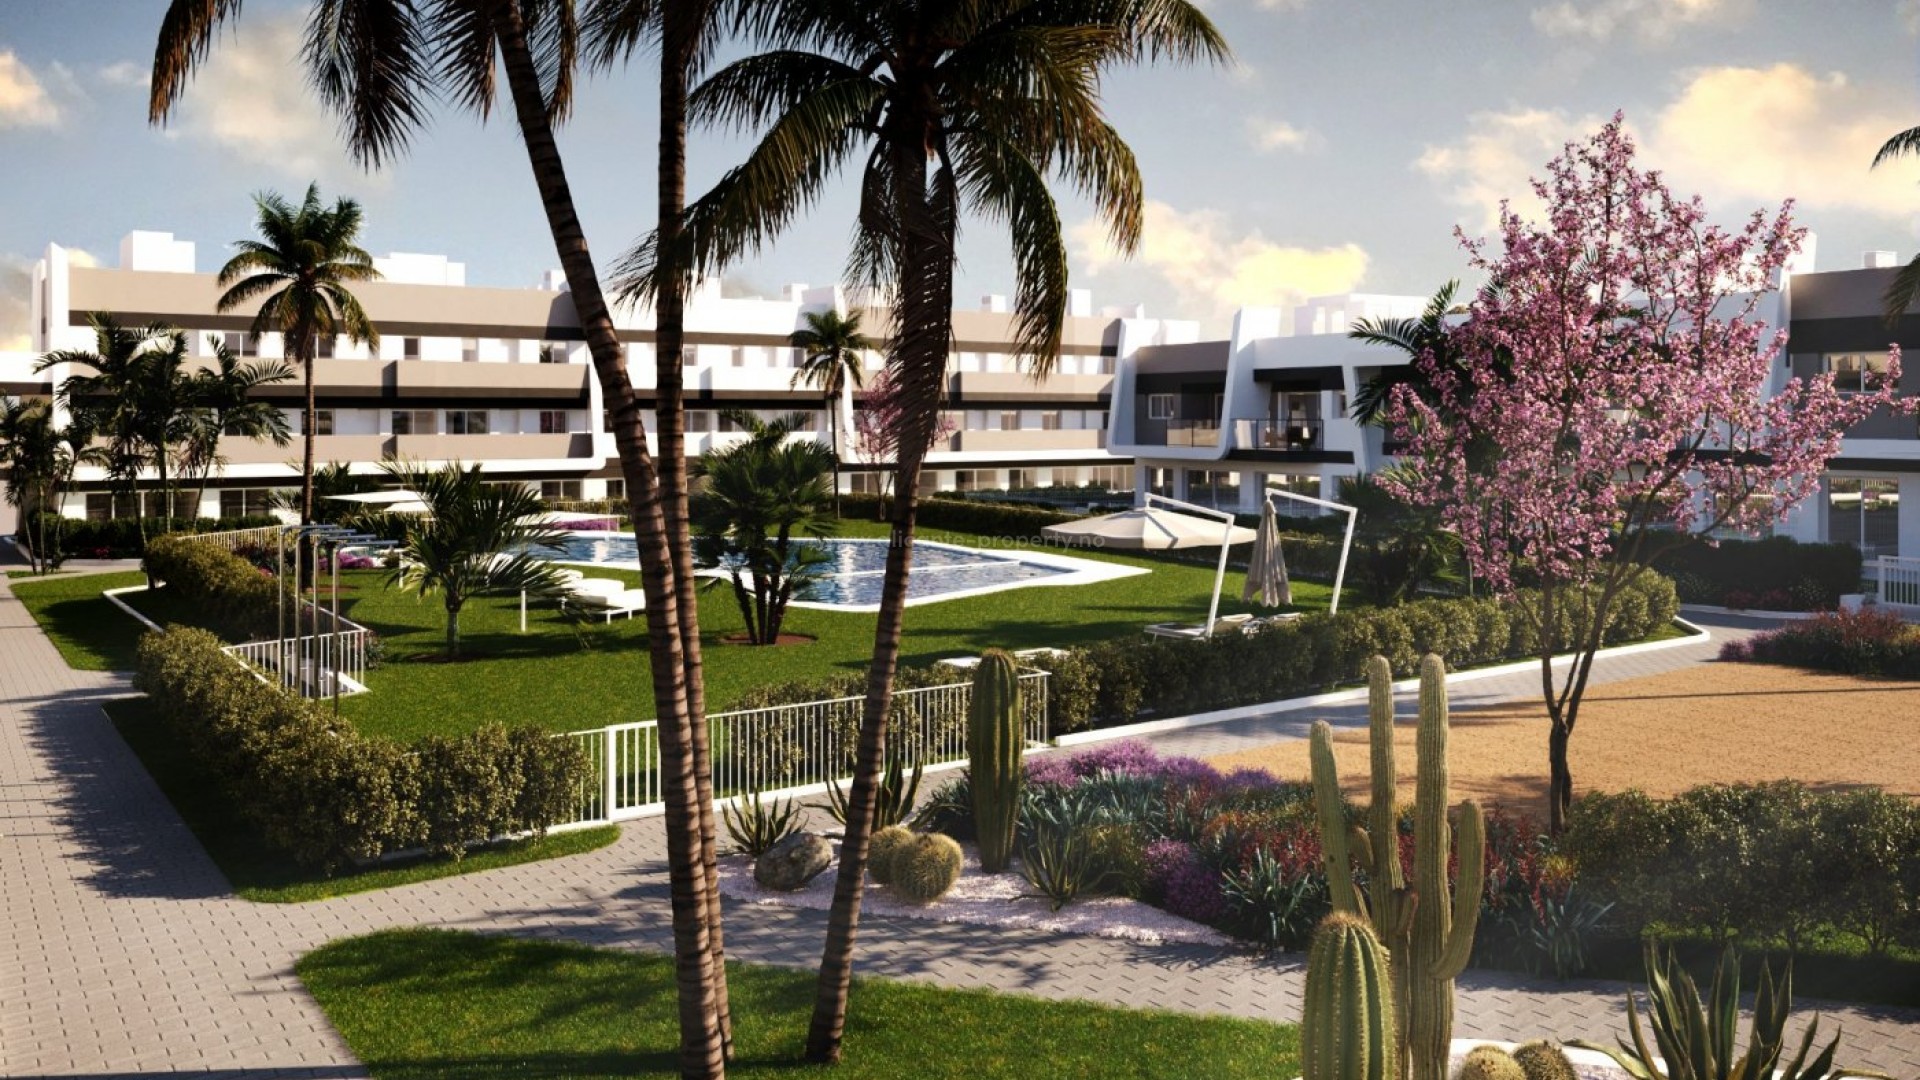 120 new apartments in Gran Alacant, Santa Pola, 2/3 bedrooms, 2 bathrooms, beautiful views of the common areas, the natural environment or the sea, and the pool and private garden